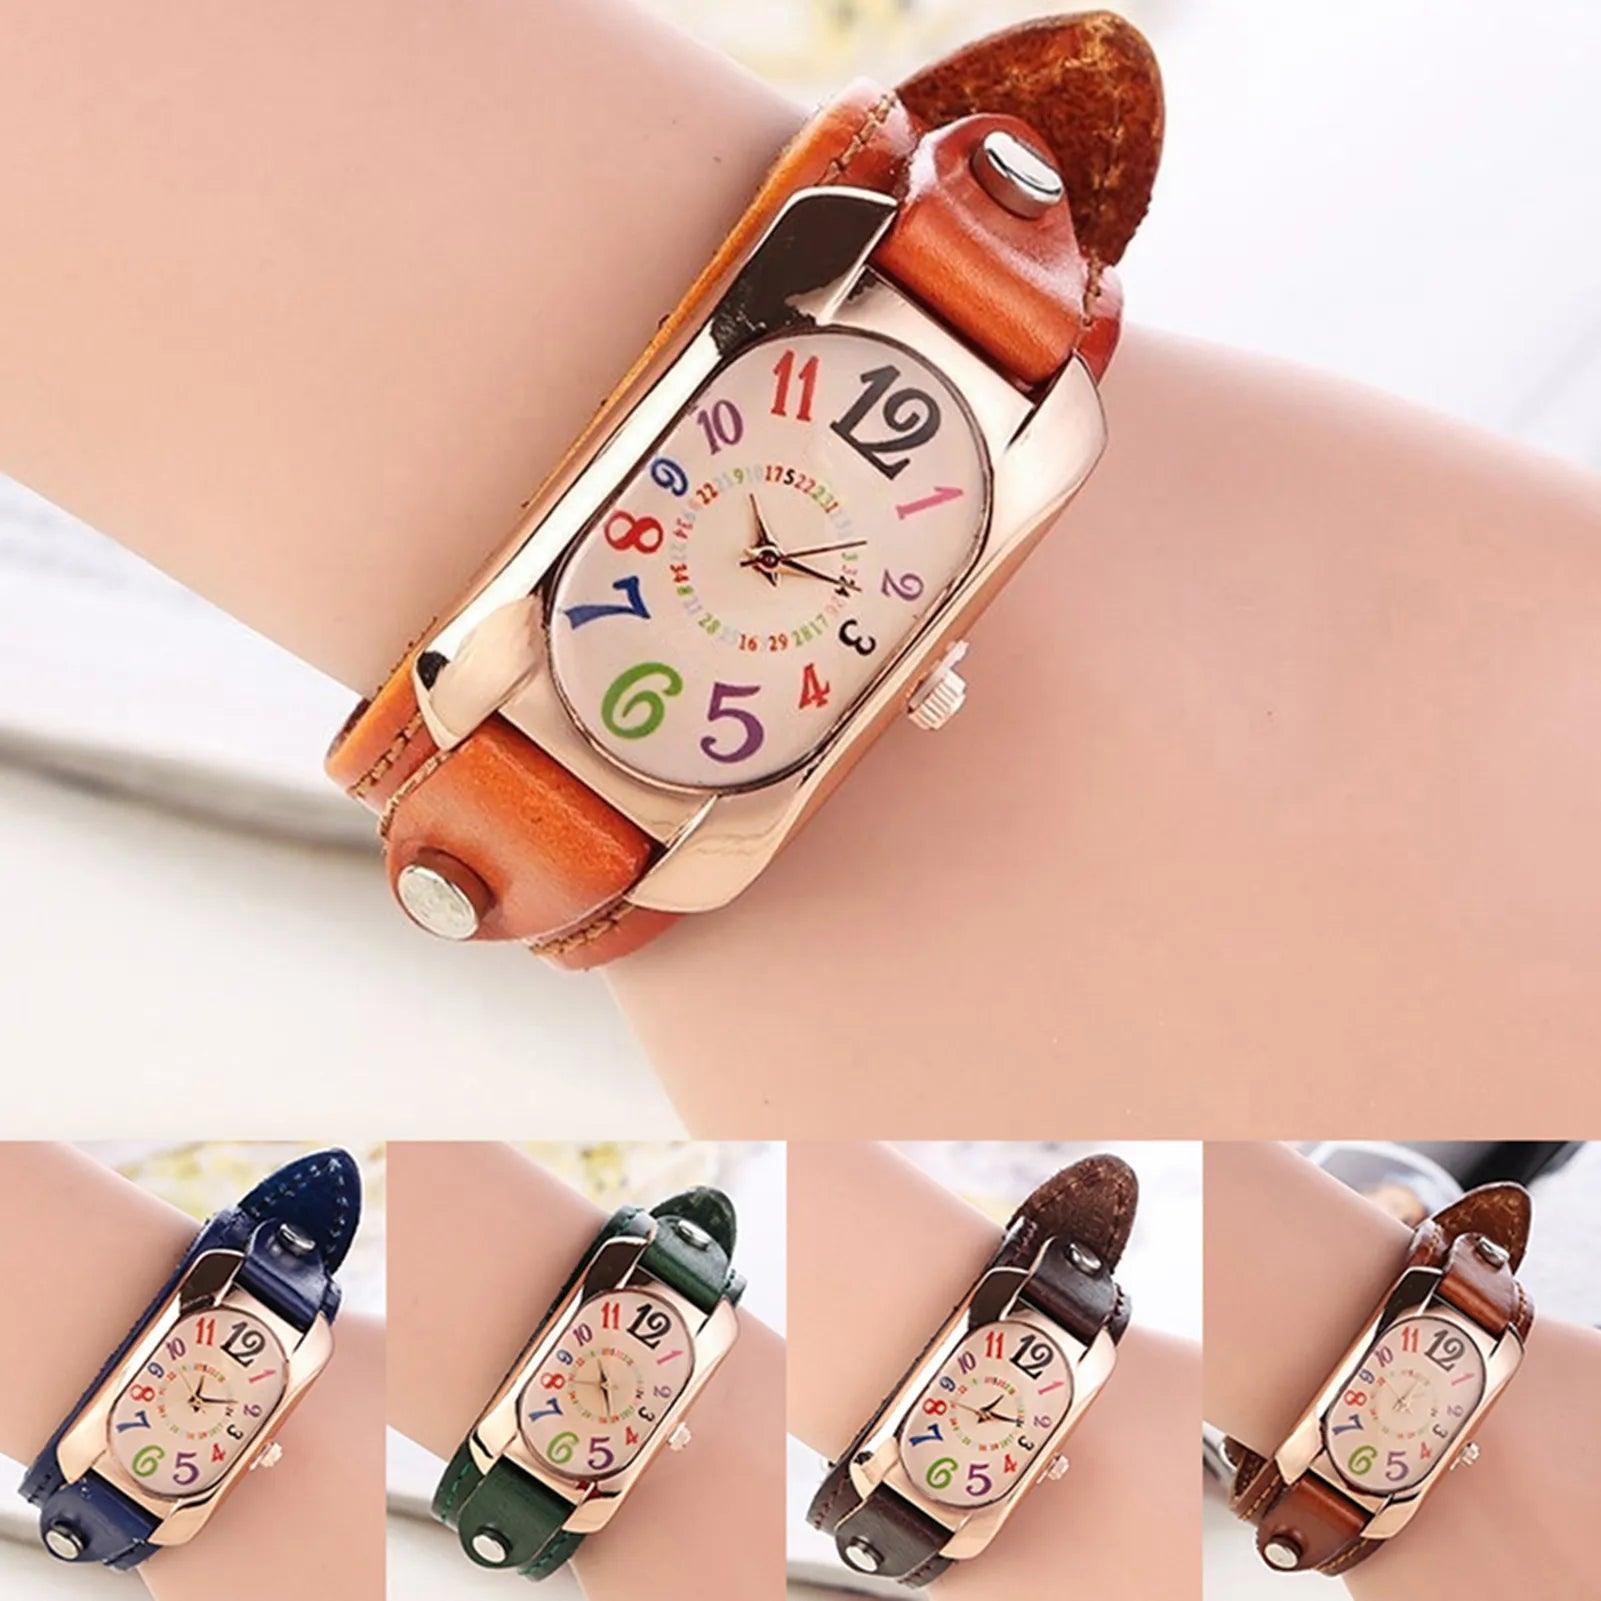 New Vintage Casual Women Watches - Alloy Dial Faux Leather Strap Oblong Case Analog Quartz Ladies Wristwatches - The Jewellery Supermarket